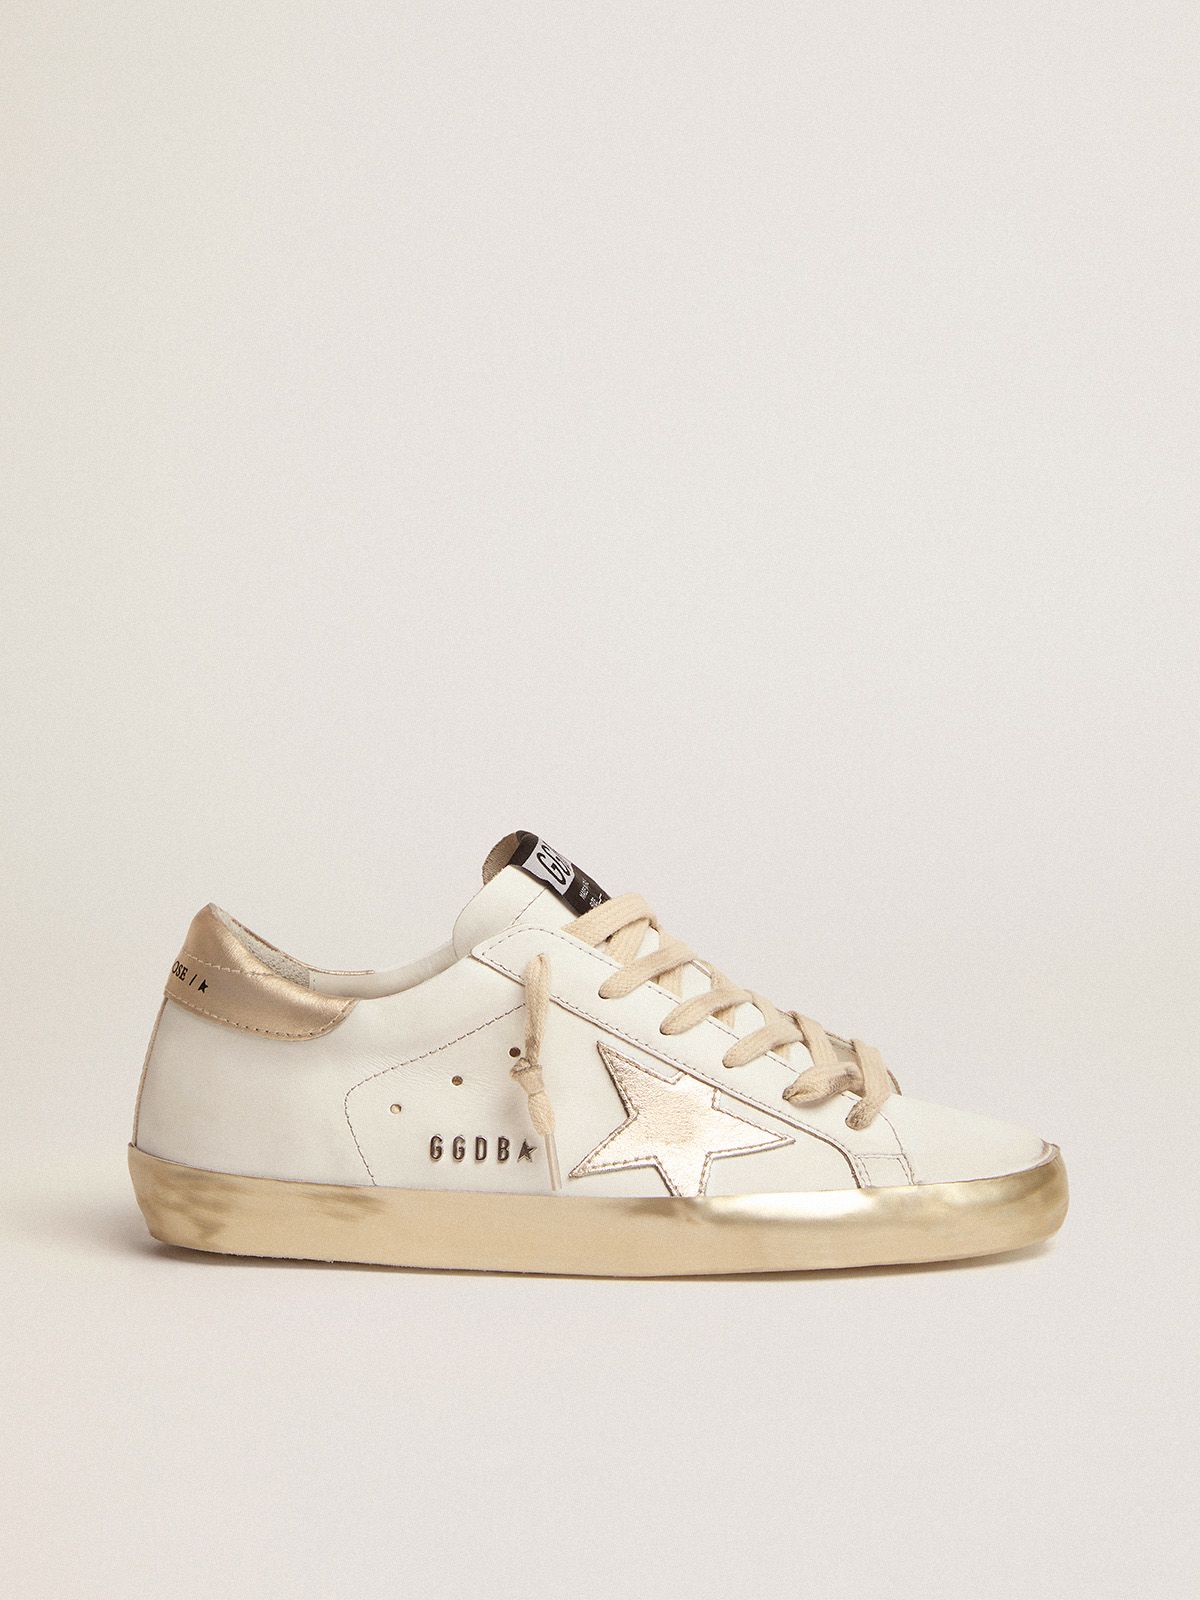 Women's Super-Star sneakers with gold | Golden Goose